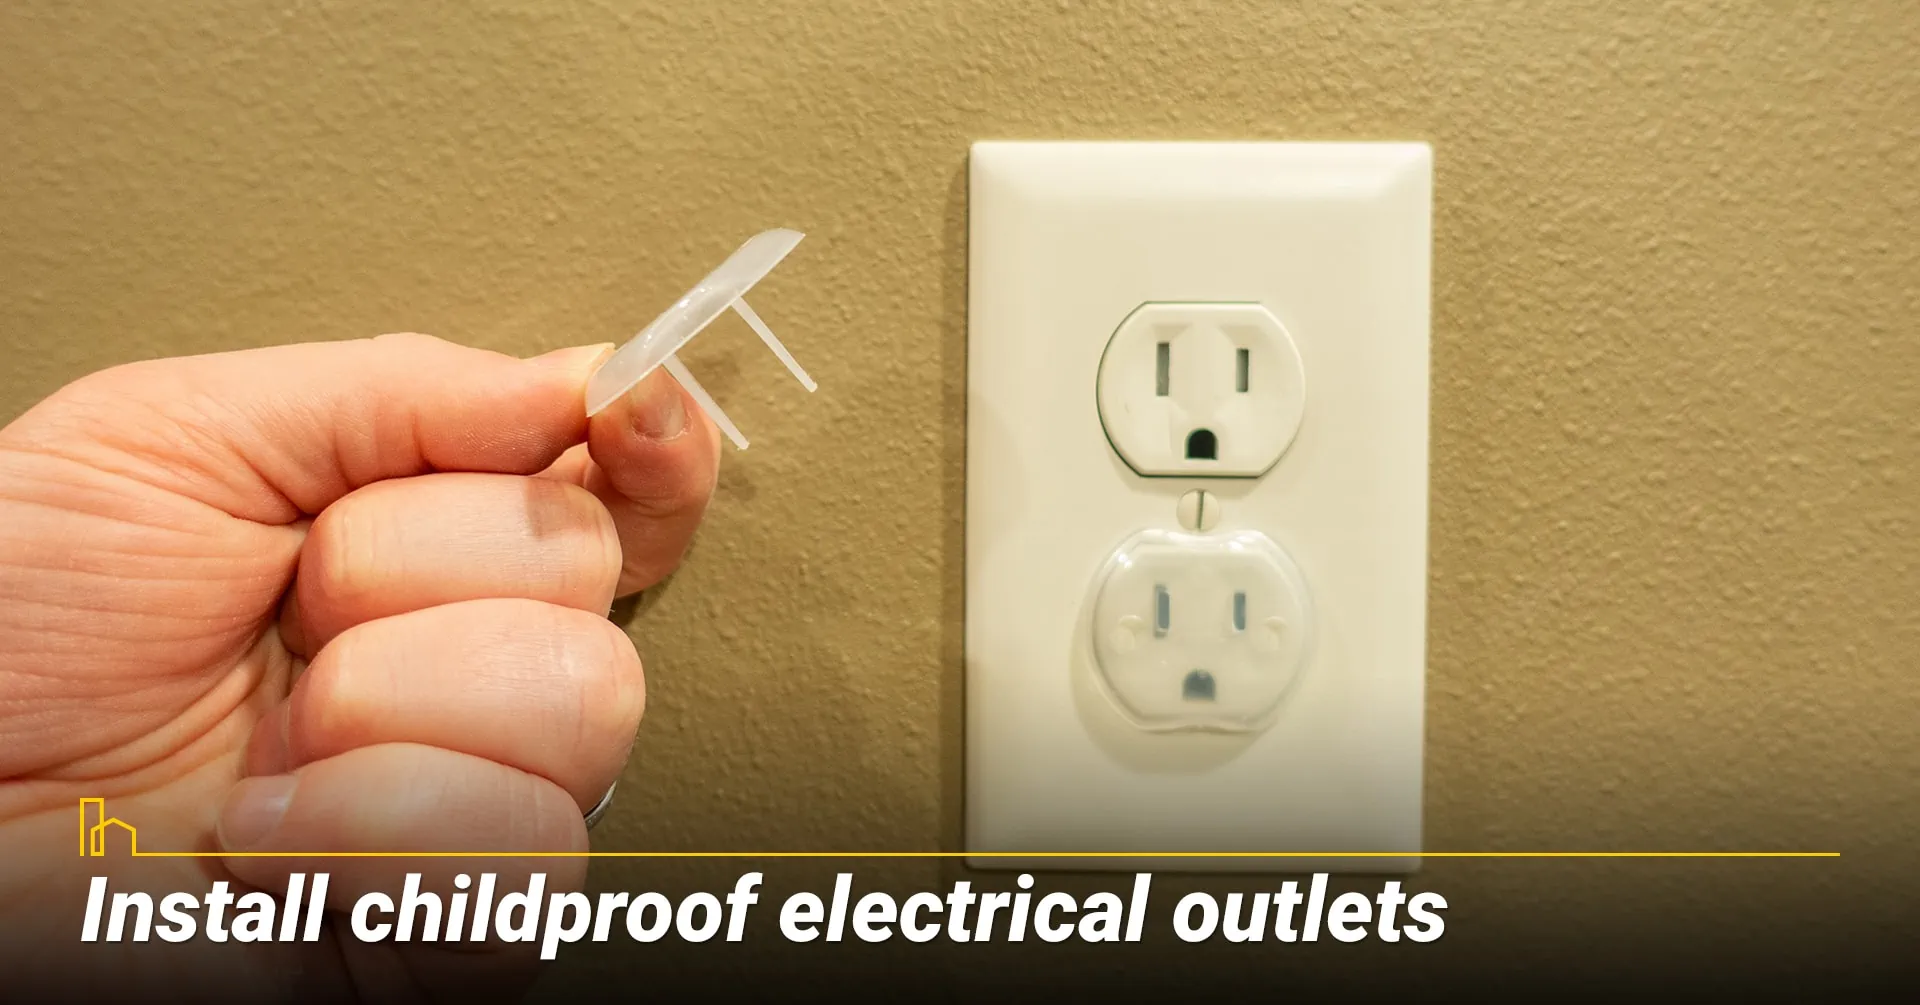 Install childproof electrical outlets.